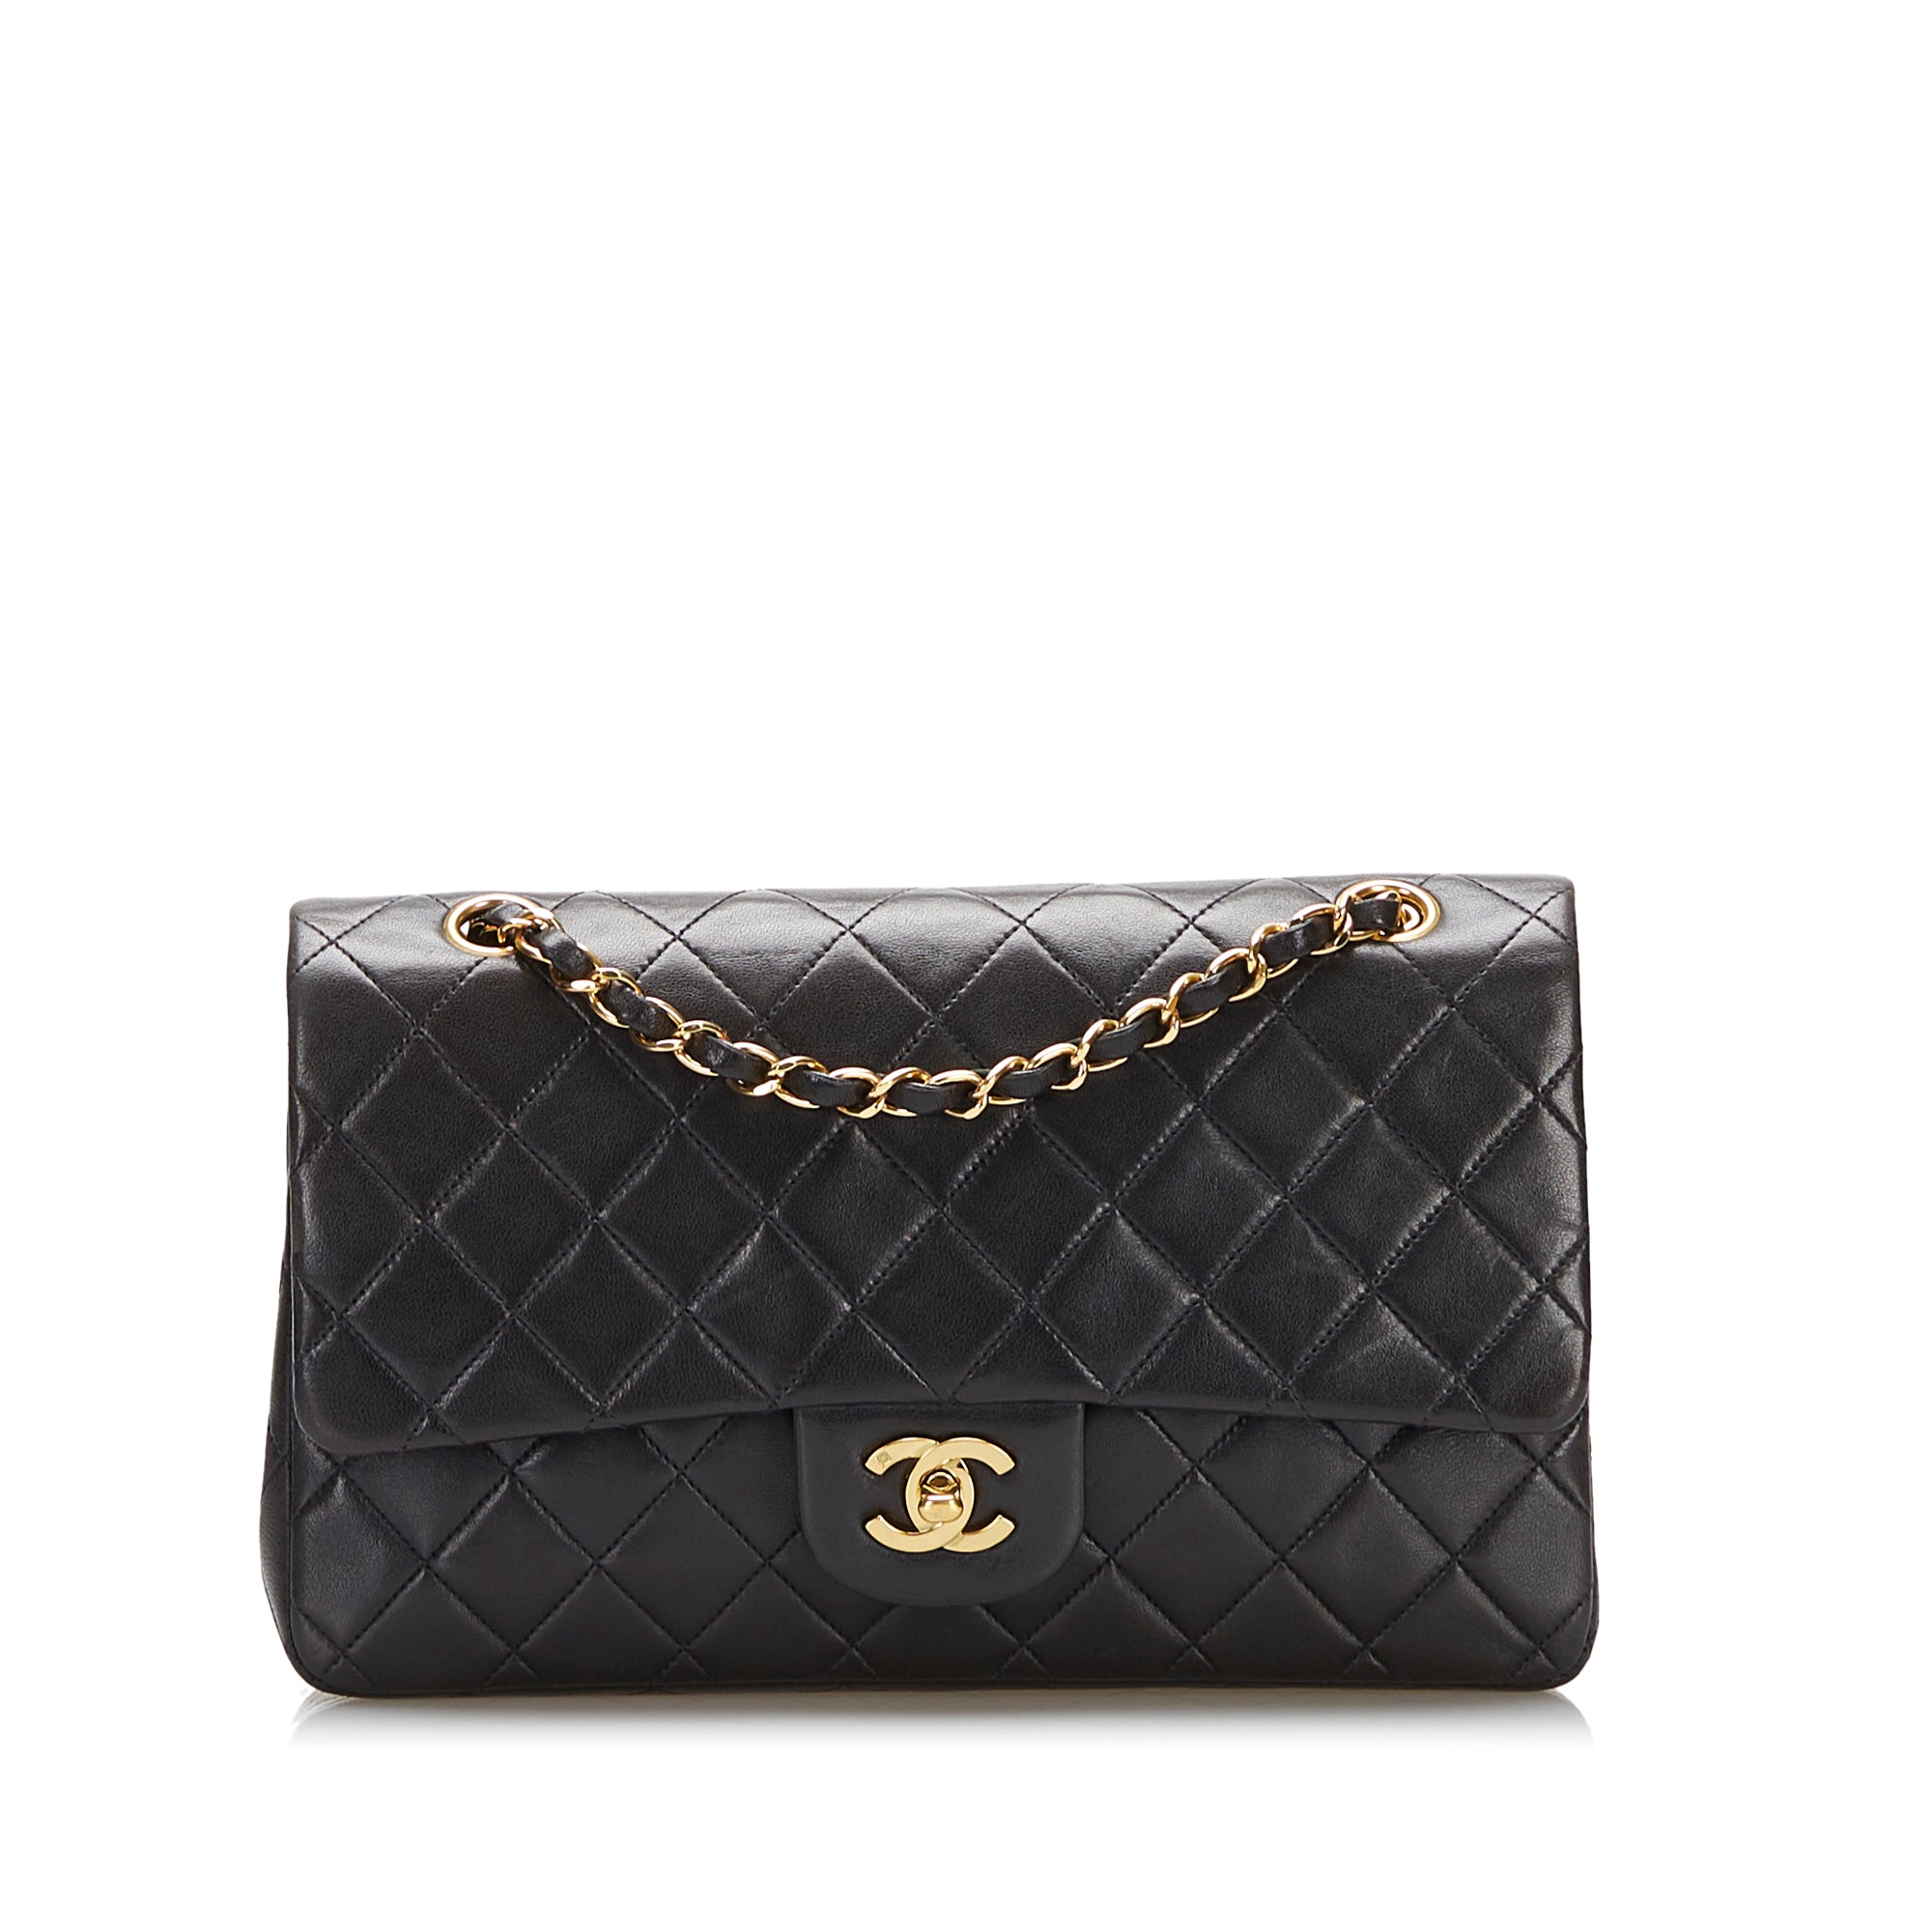 GREEN SUEDE QUILTED SHOULDER BAG CHANEL  A Collection of a Lifetime  Chanel Online  Jewellery  Sothebys